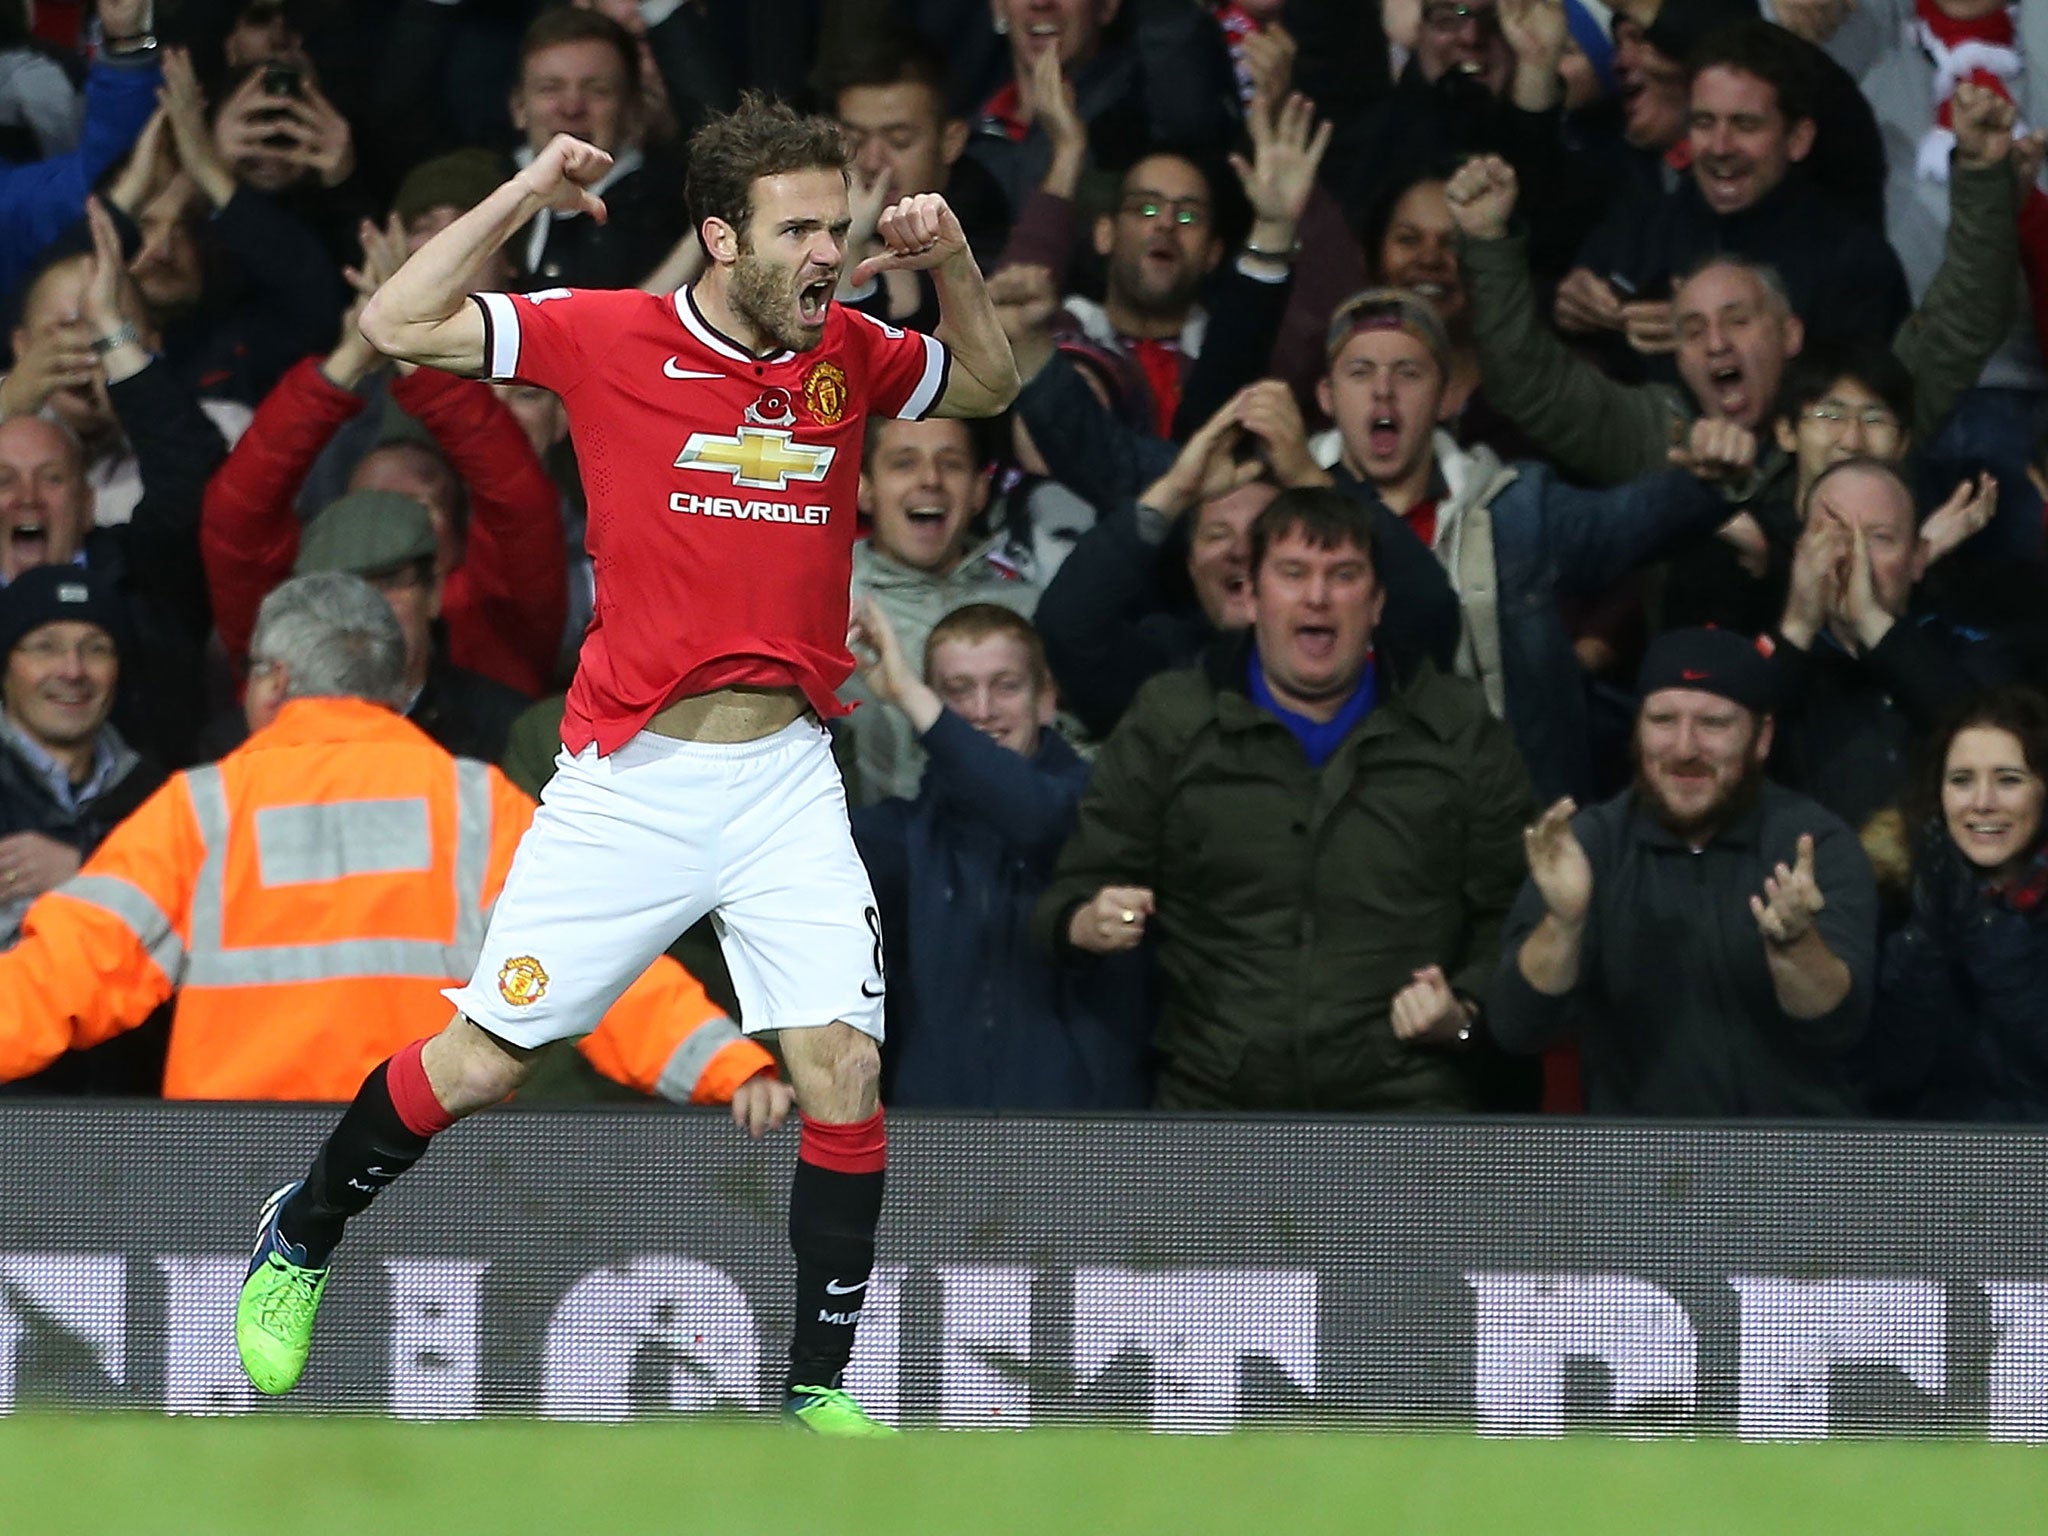 Juan Mata rescued Manchester United in the 1-0 win over Crystal Palace